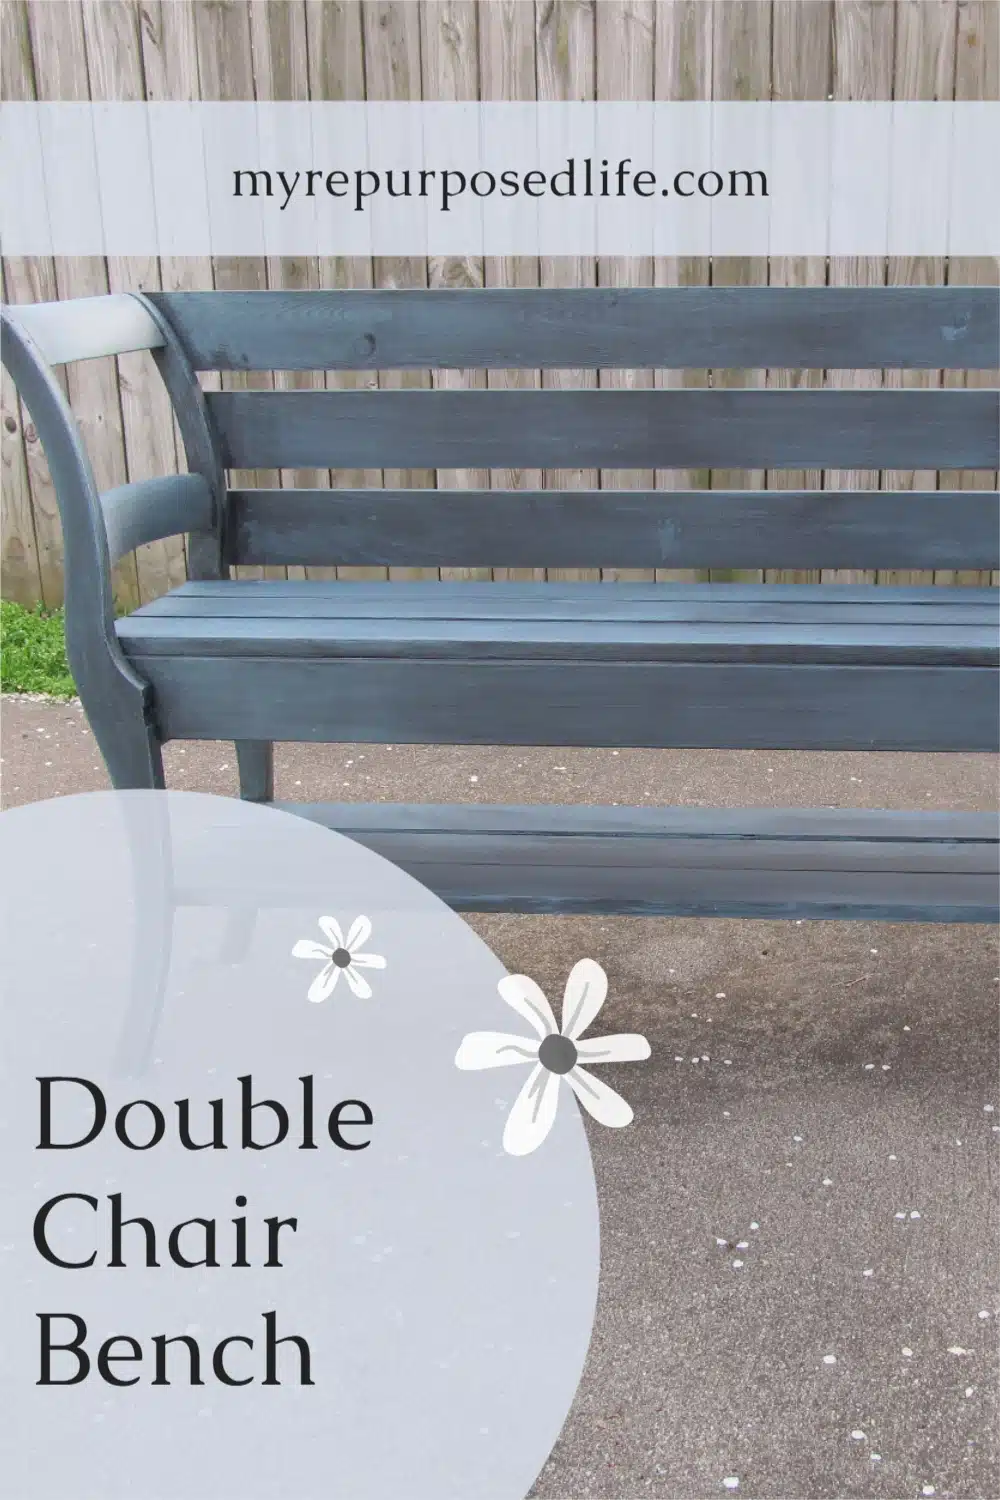 How to NOT Make a Double Chair Bench Seriously, the double chair bench turned out okay in the end, but it was touch and go for awhile. Tips on using two old chairs, and new lumber to make an awesome new bench! #MyRepurposedLife #repurposed #chairs #bench #diy #project via @repurposedlife